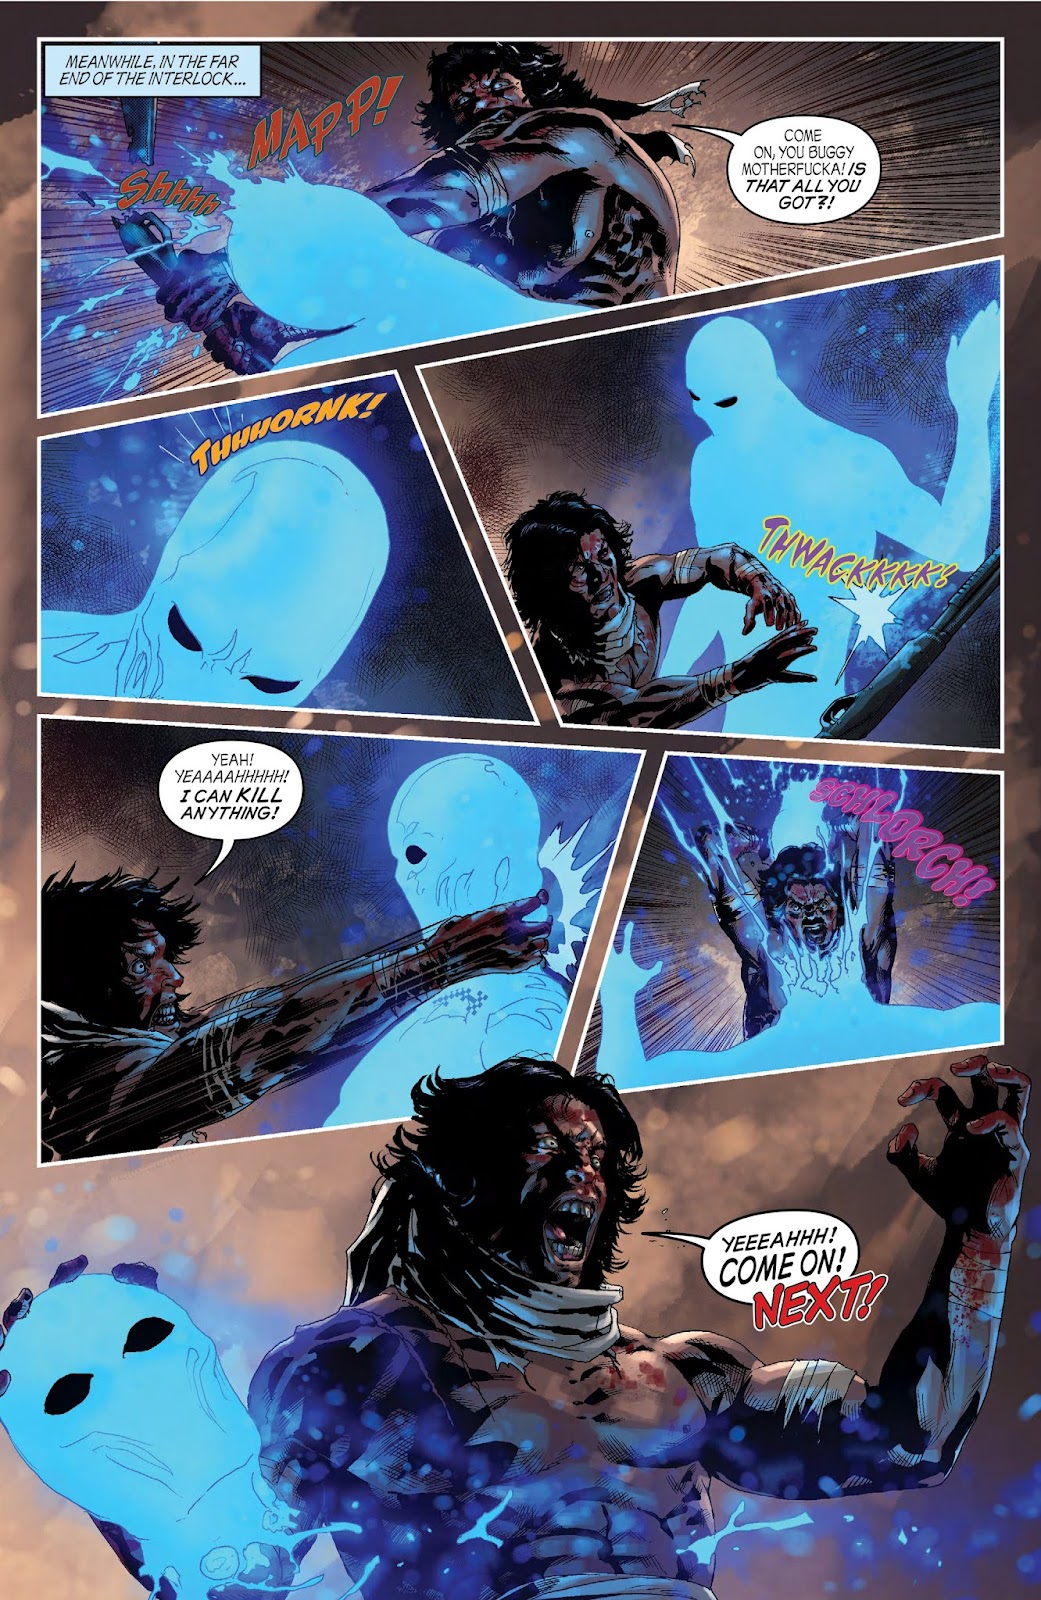 John Carpenter's Tales of Science Fiction: The Standoff issue 4 - Page 14